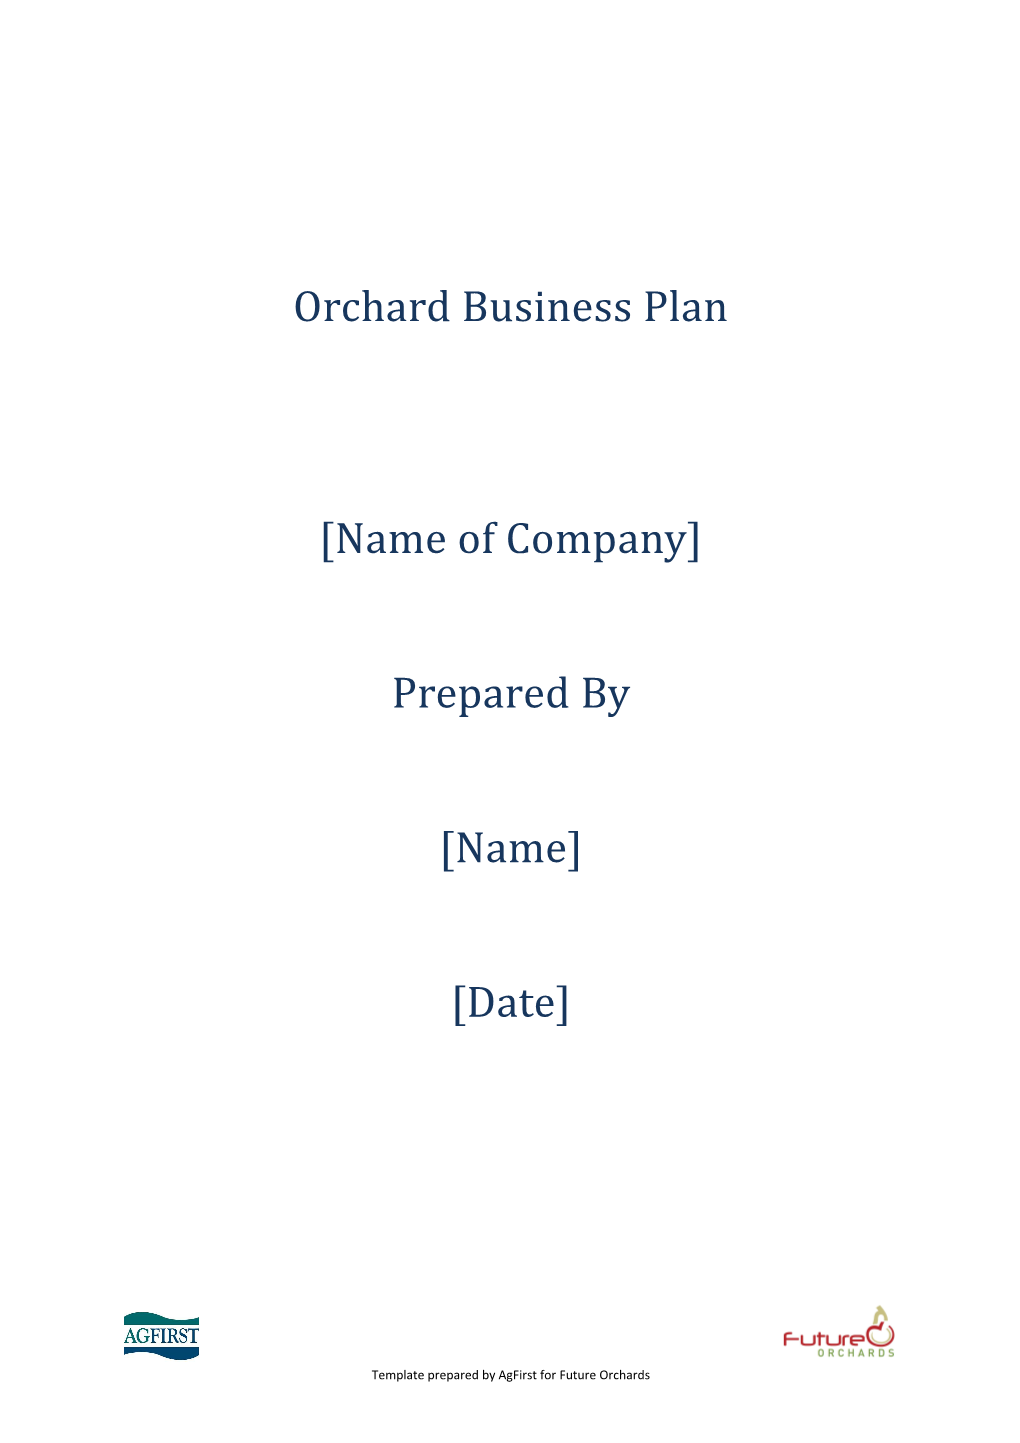 Orchard Business Plan